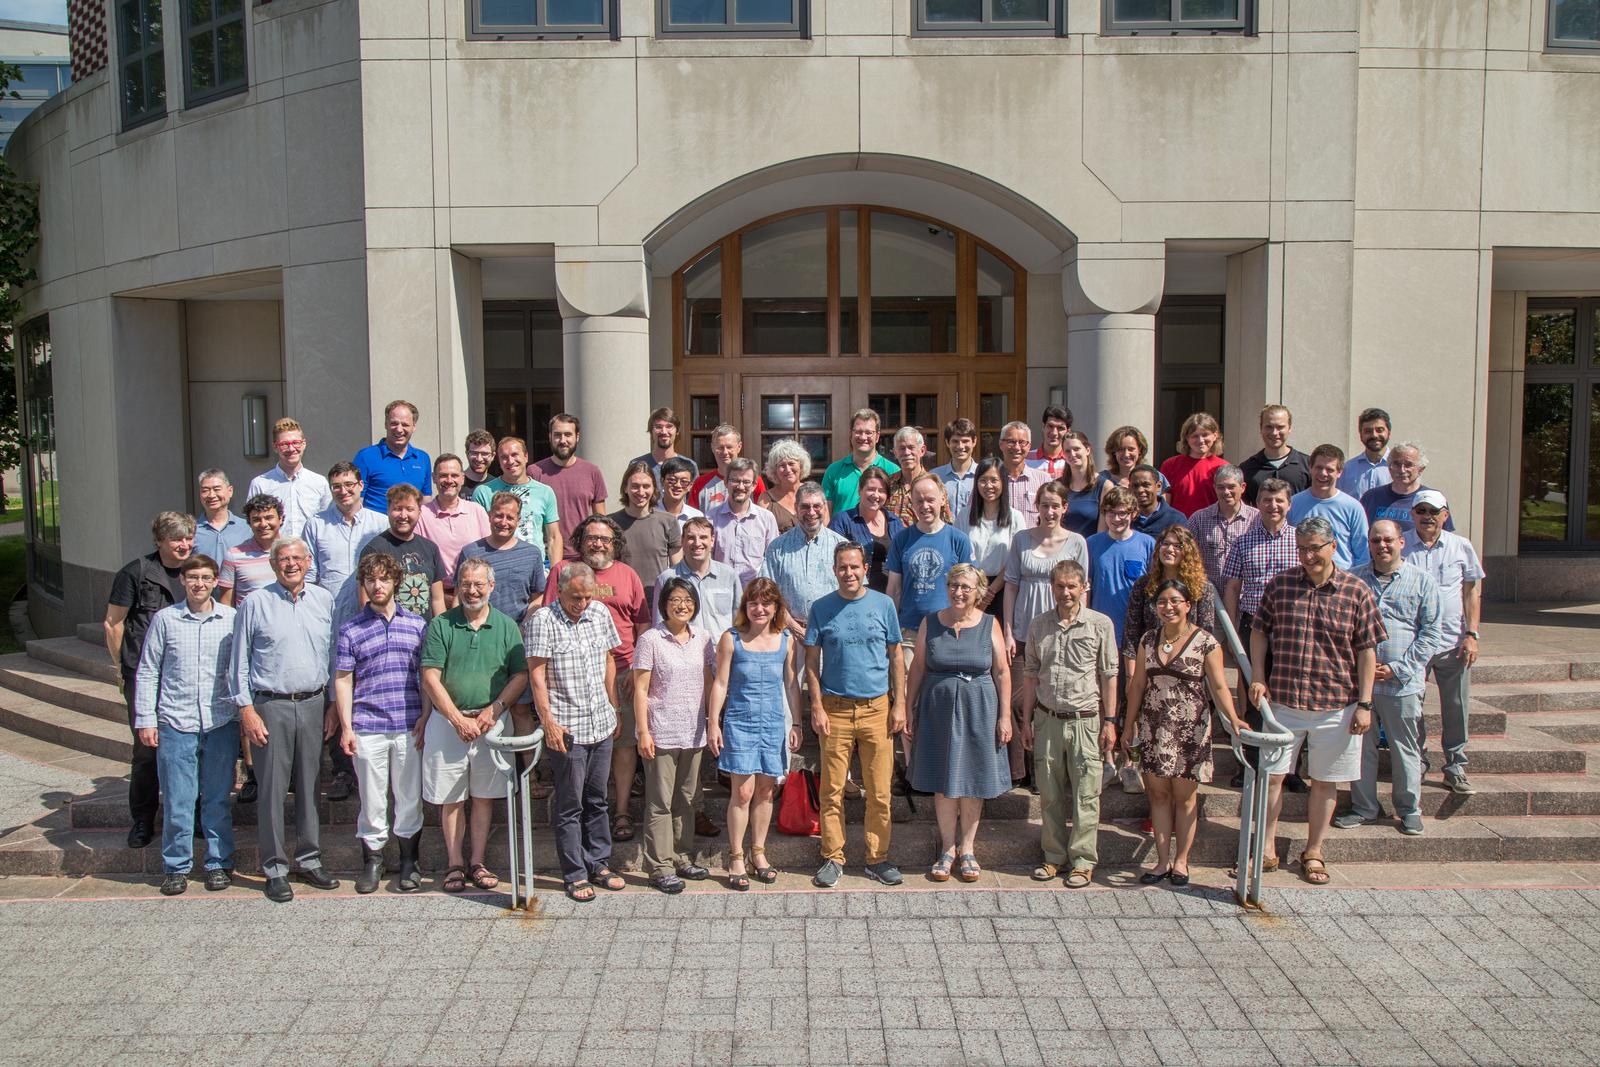 Group photo of the participants of AofA 2017 in Princeton